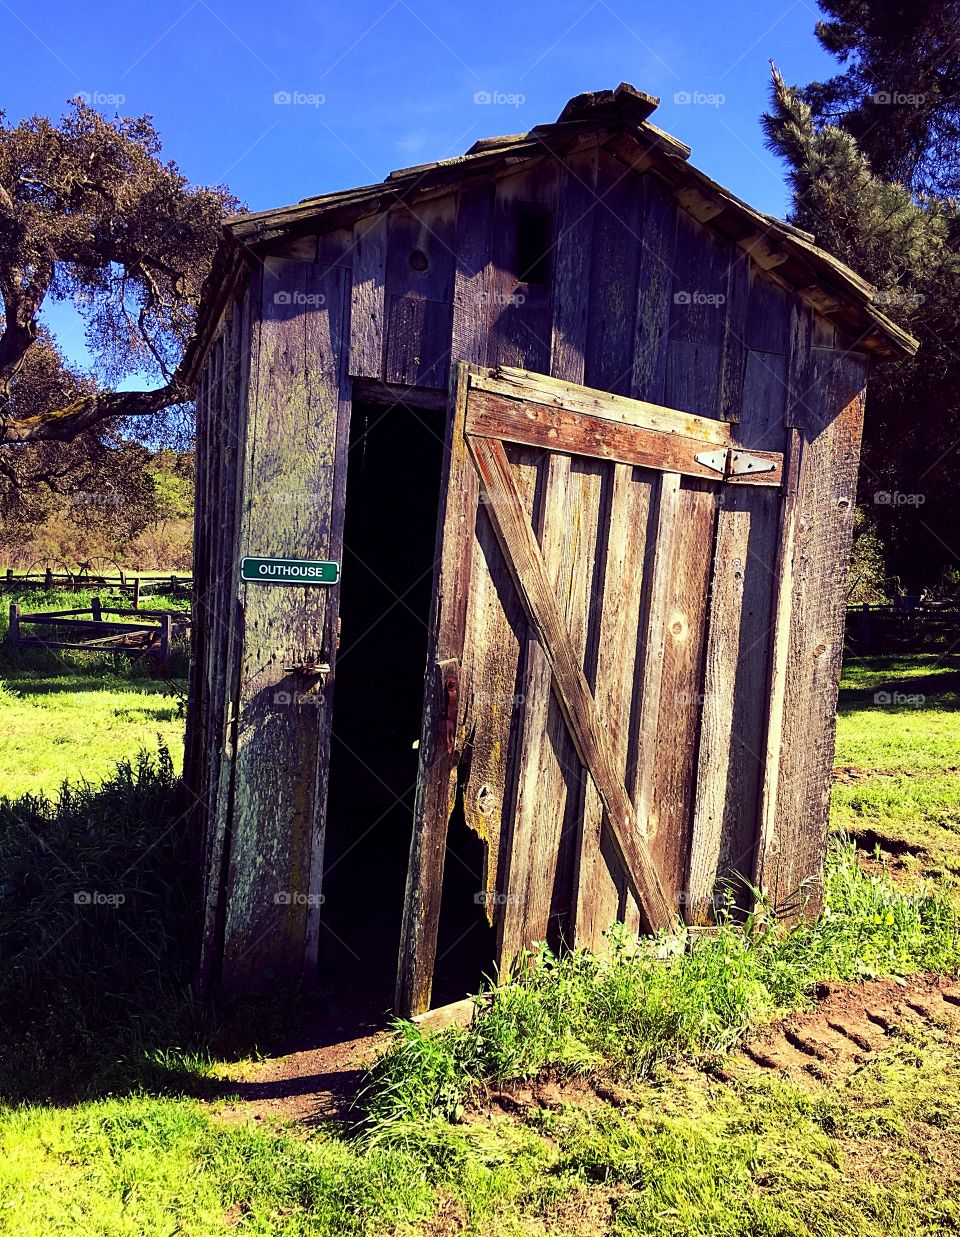 Yee ‘ole outhouse at Garland Ranch Regional Park in Monterey County, on the former farm property located within this beautiful park. 